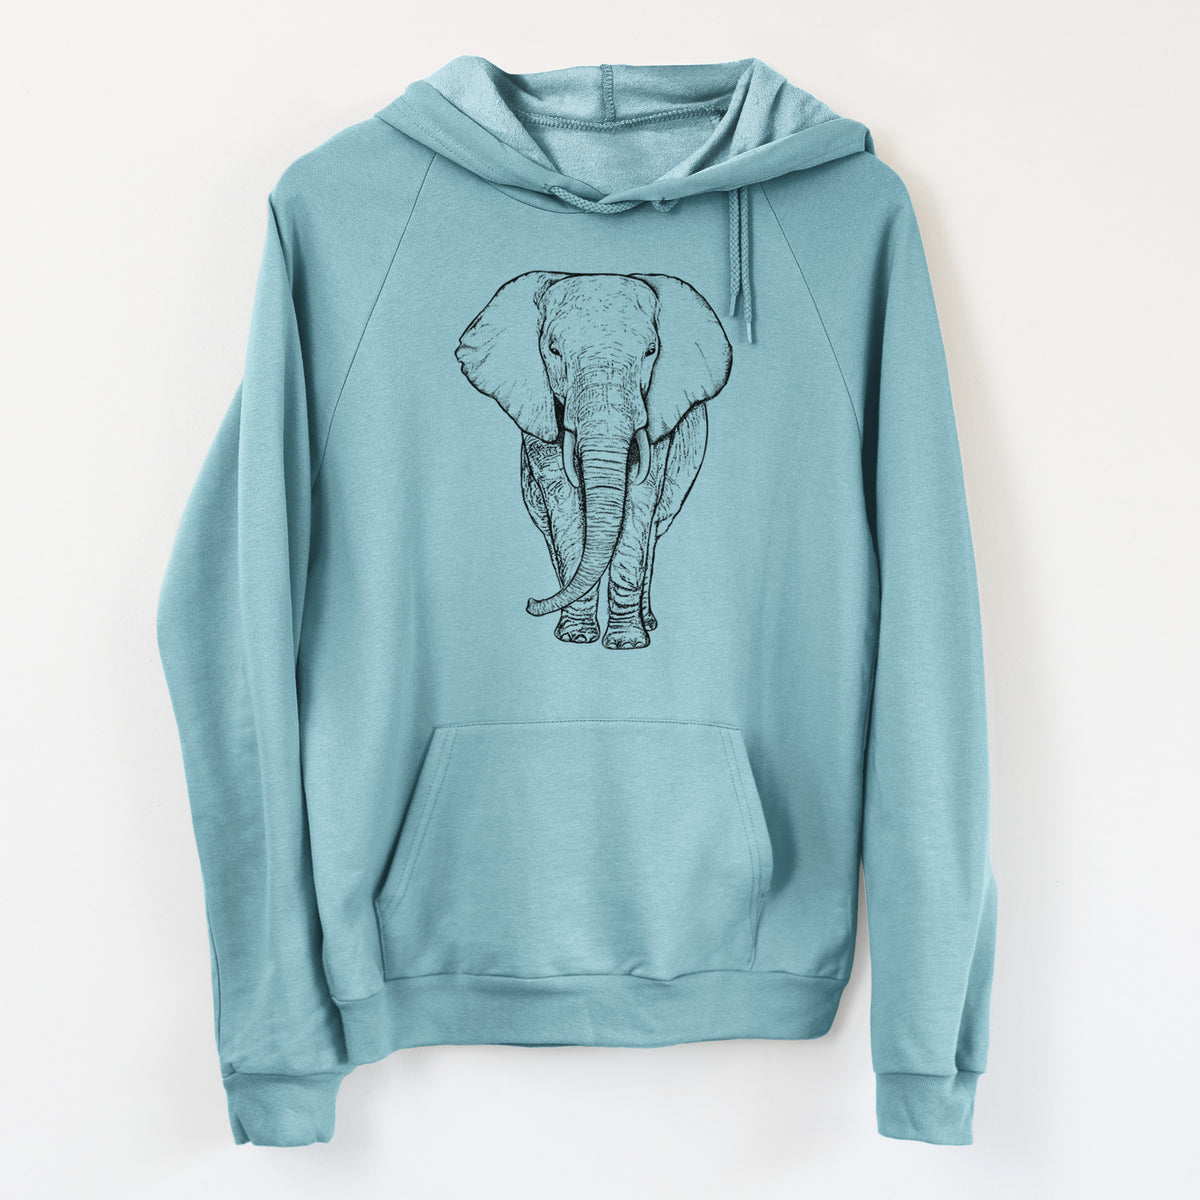 Loxodonta africana - African Elephant - Unisex Pullover Hoodie - Made in USA - 100% Organic Cotton